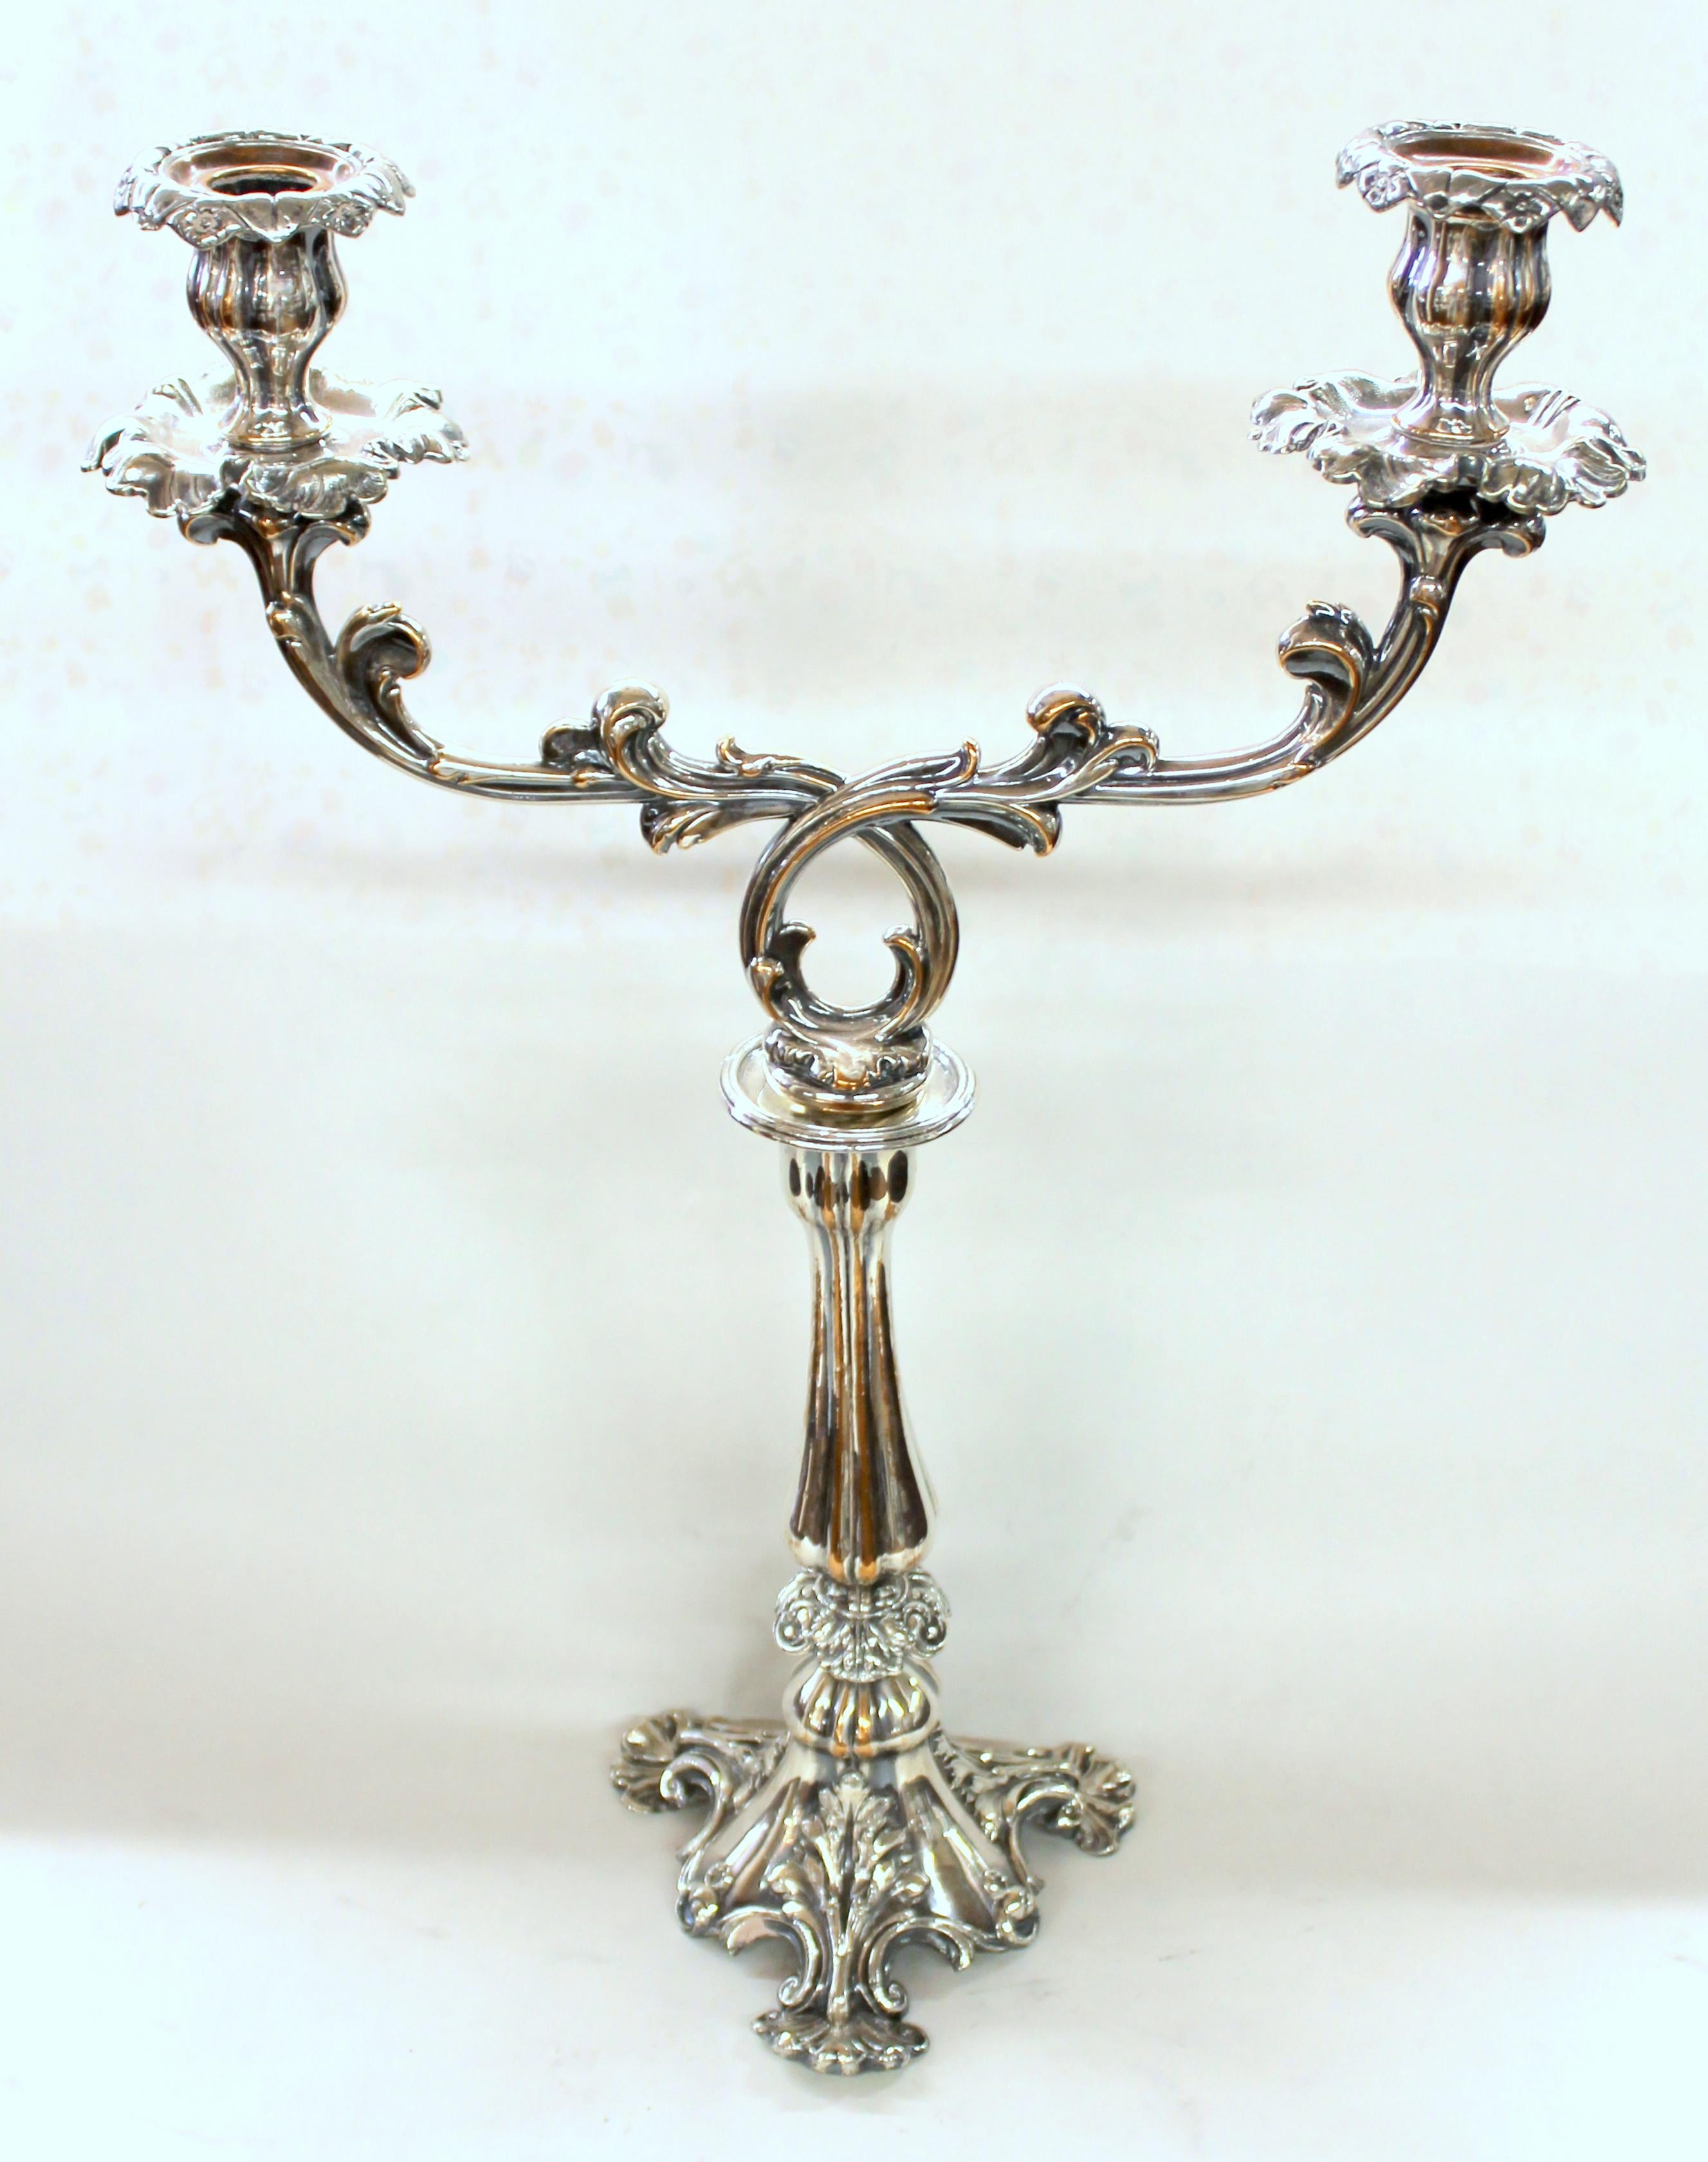 Fabulous quality old Sheffield plate George IV Rococo style two-light candelabrum on a magnificent acanthus leaf Trefoil Foot. Also included is an original bill of sale when it was purchased in London in 1924 - obviously not the first time it was